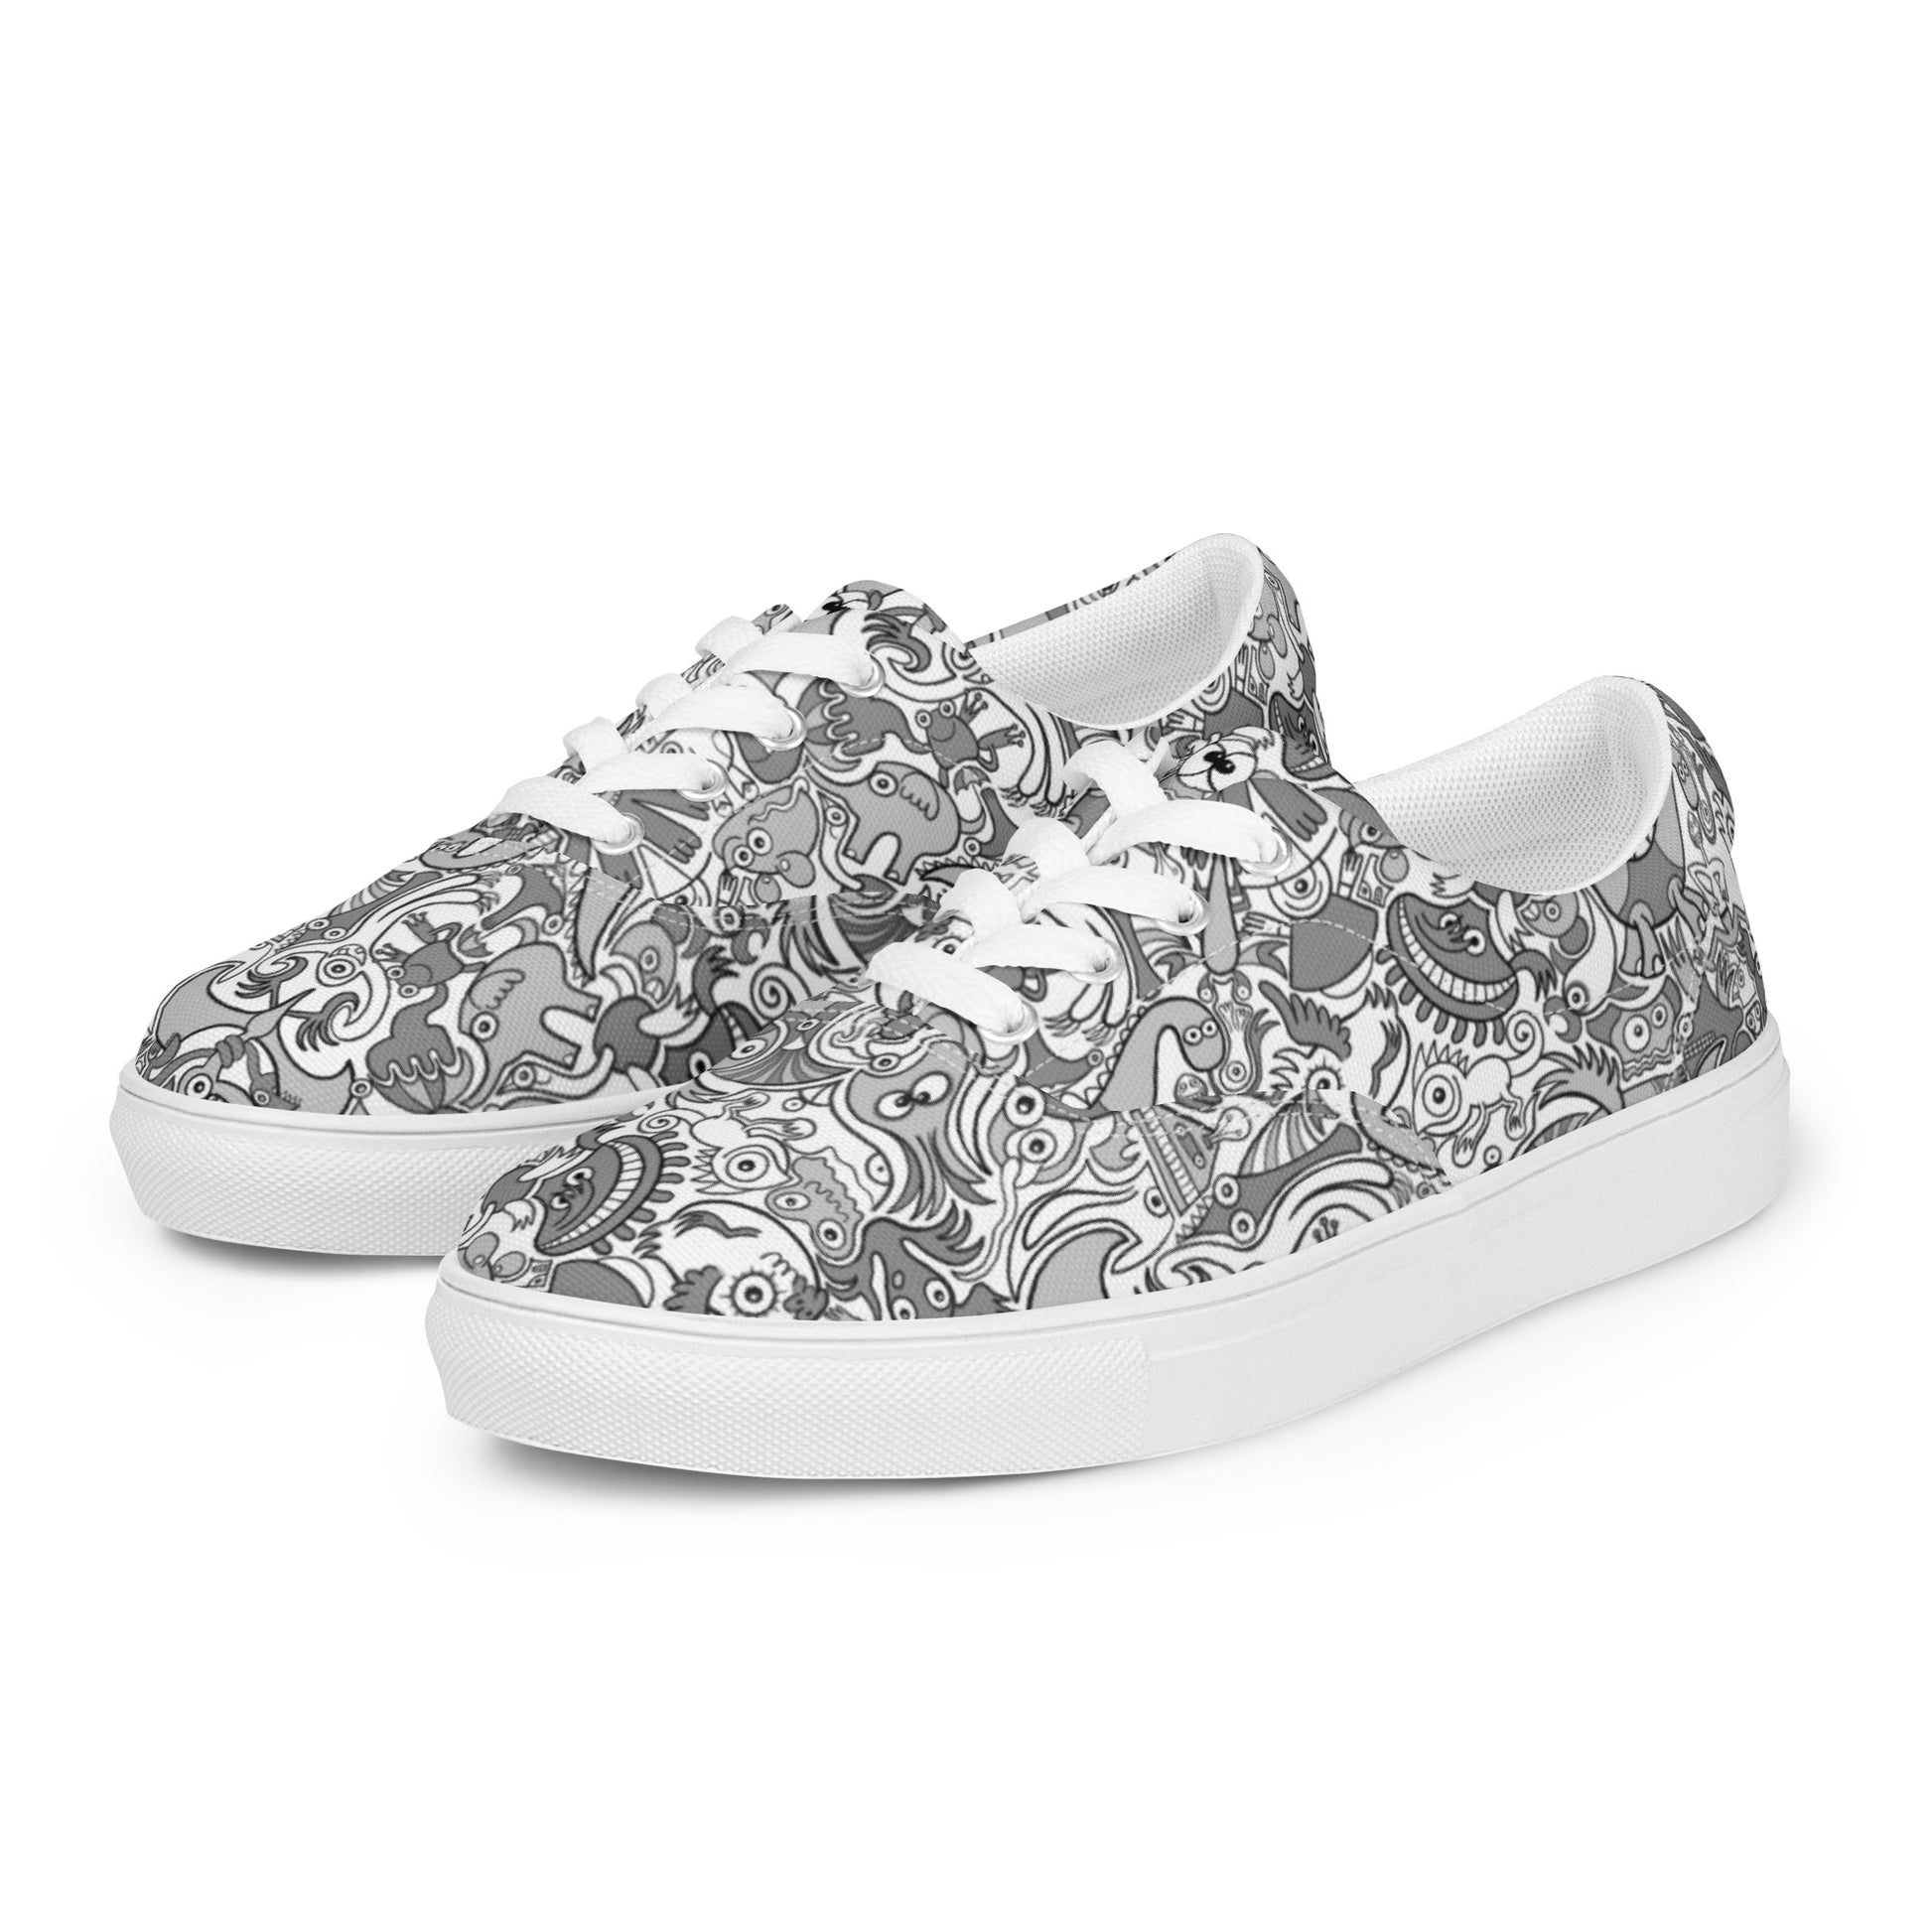 Awesome doodle creatures in a variety of tones of gray Men’s lace-up canvas shoes. Overview